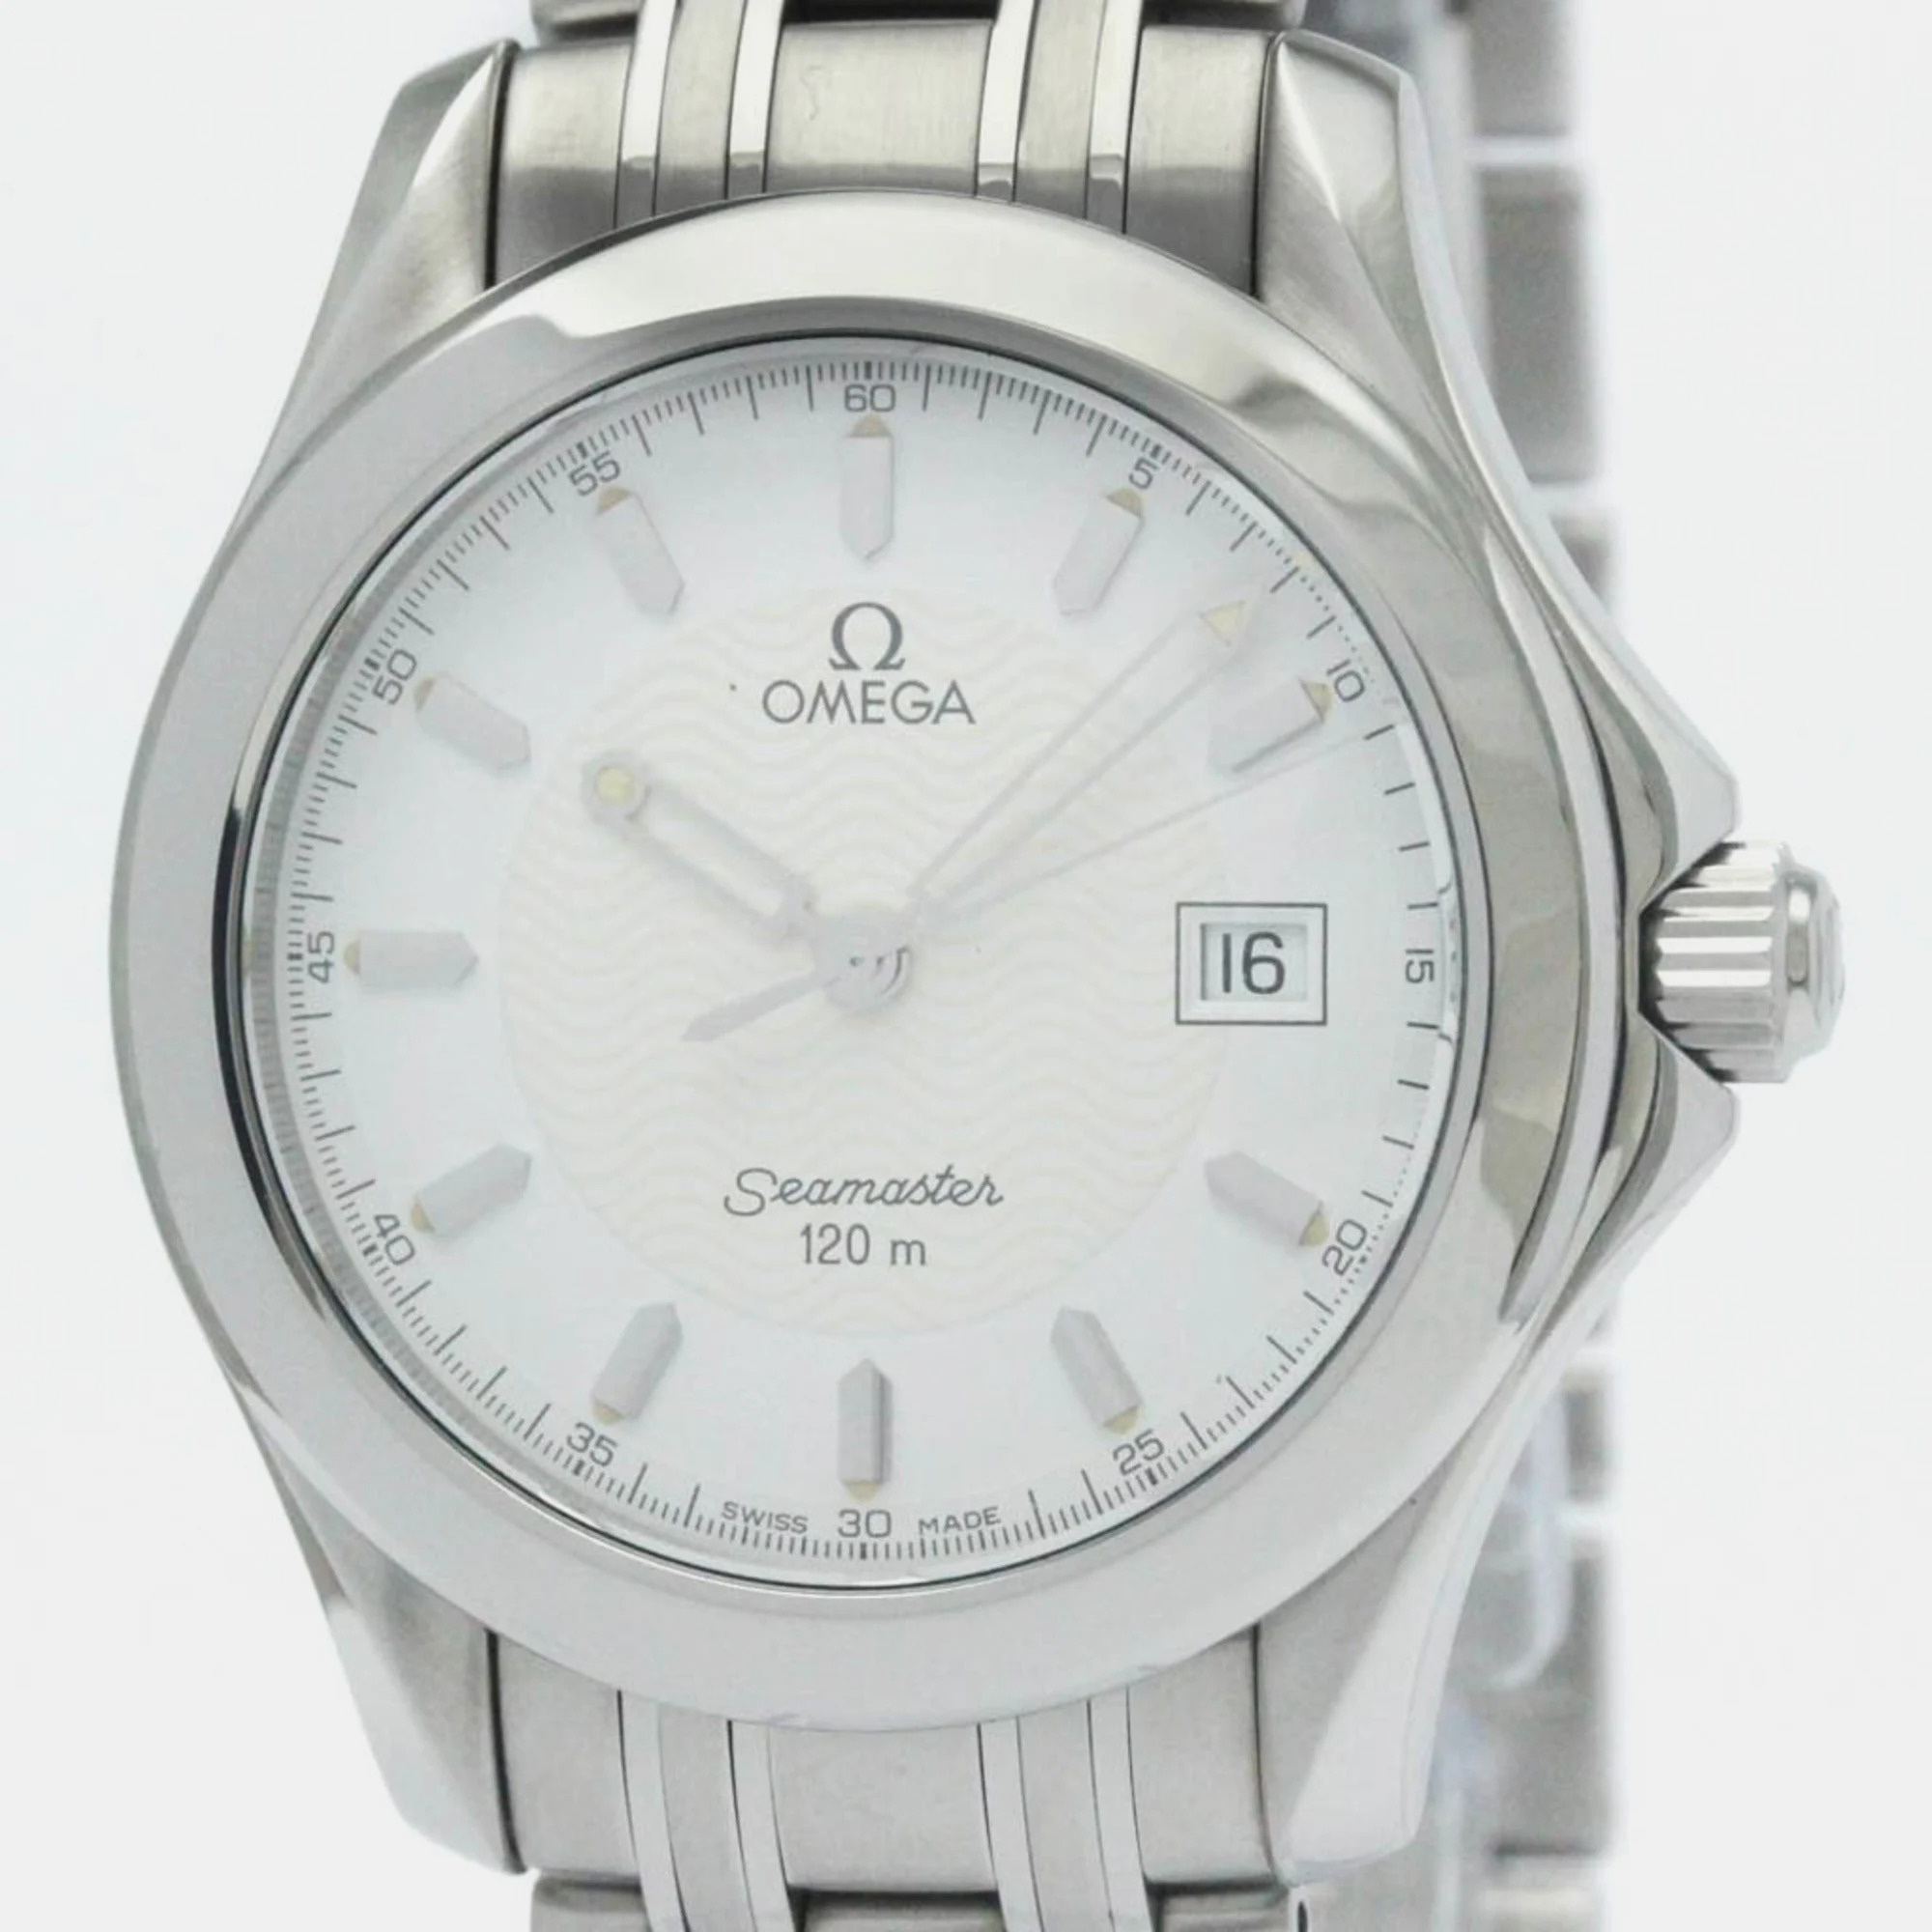 Pre-owned Omega White Stainless Steel Seamaster 2511.21 Quartz Men's Wristwatch 36 Mm